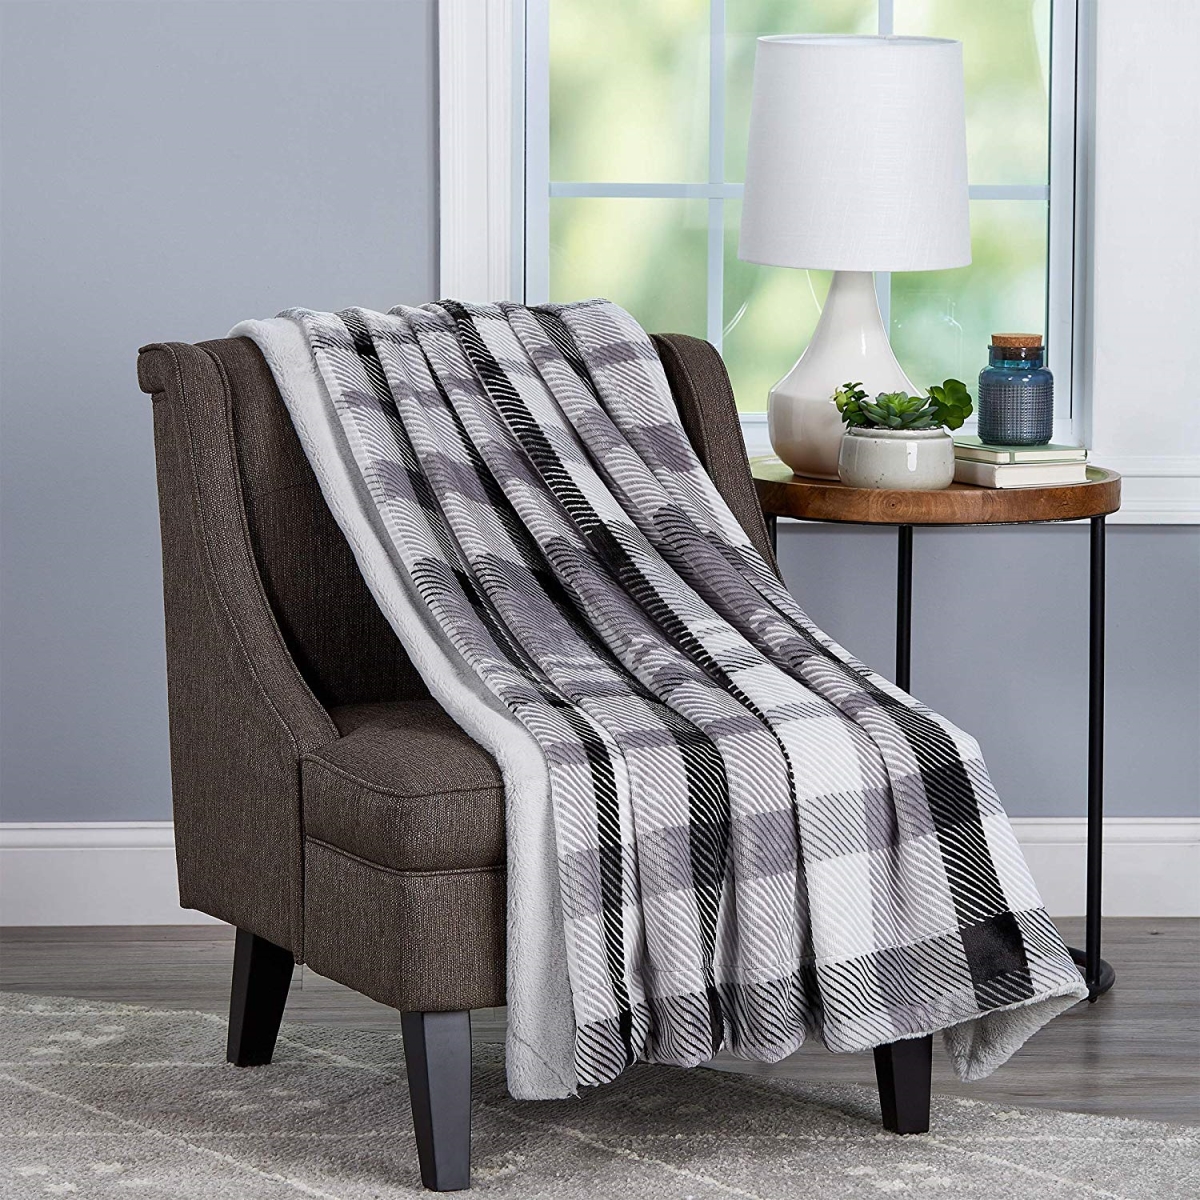 66a-34991 Soft Hypoallergenic Plaid Printed Flannel Blanket With Solid Faux Fur Rabbit Back Throw Luxurious, 60 X 70 In. - Grey